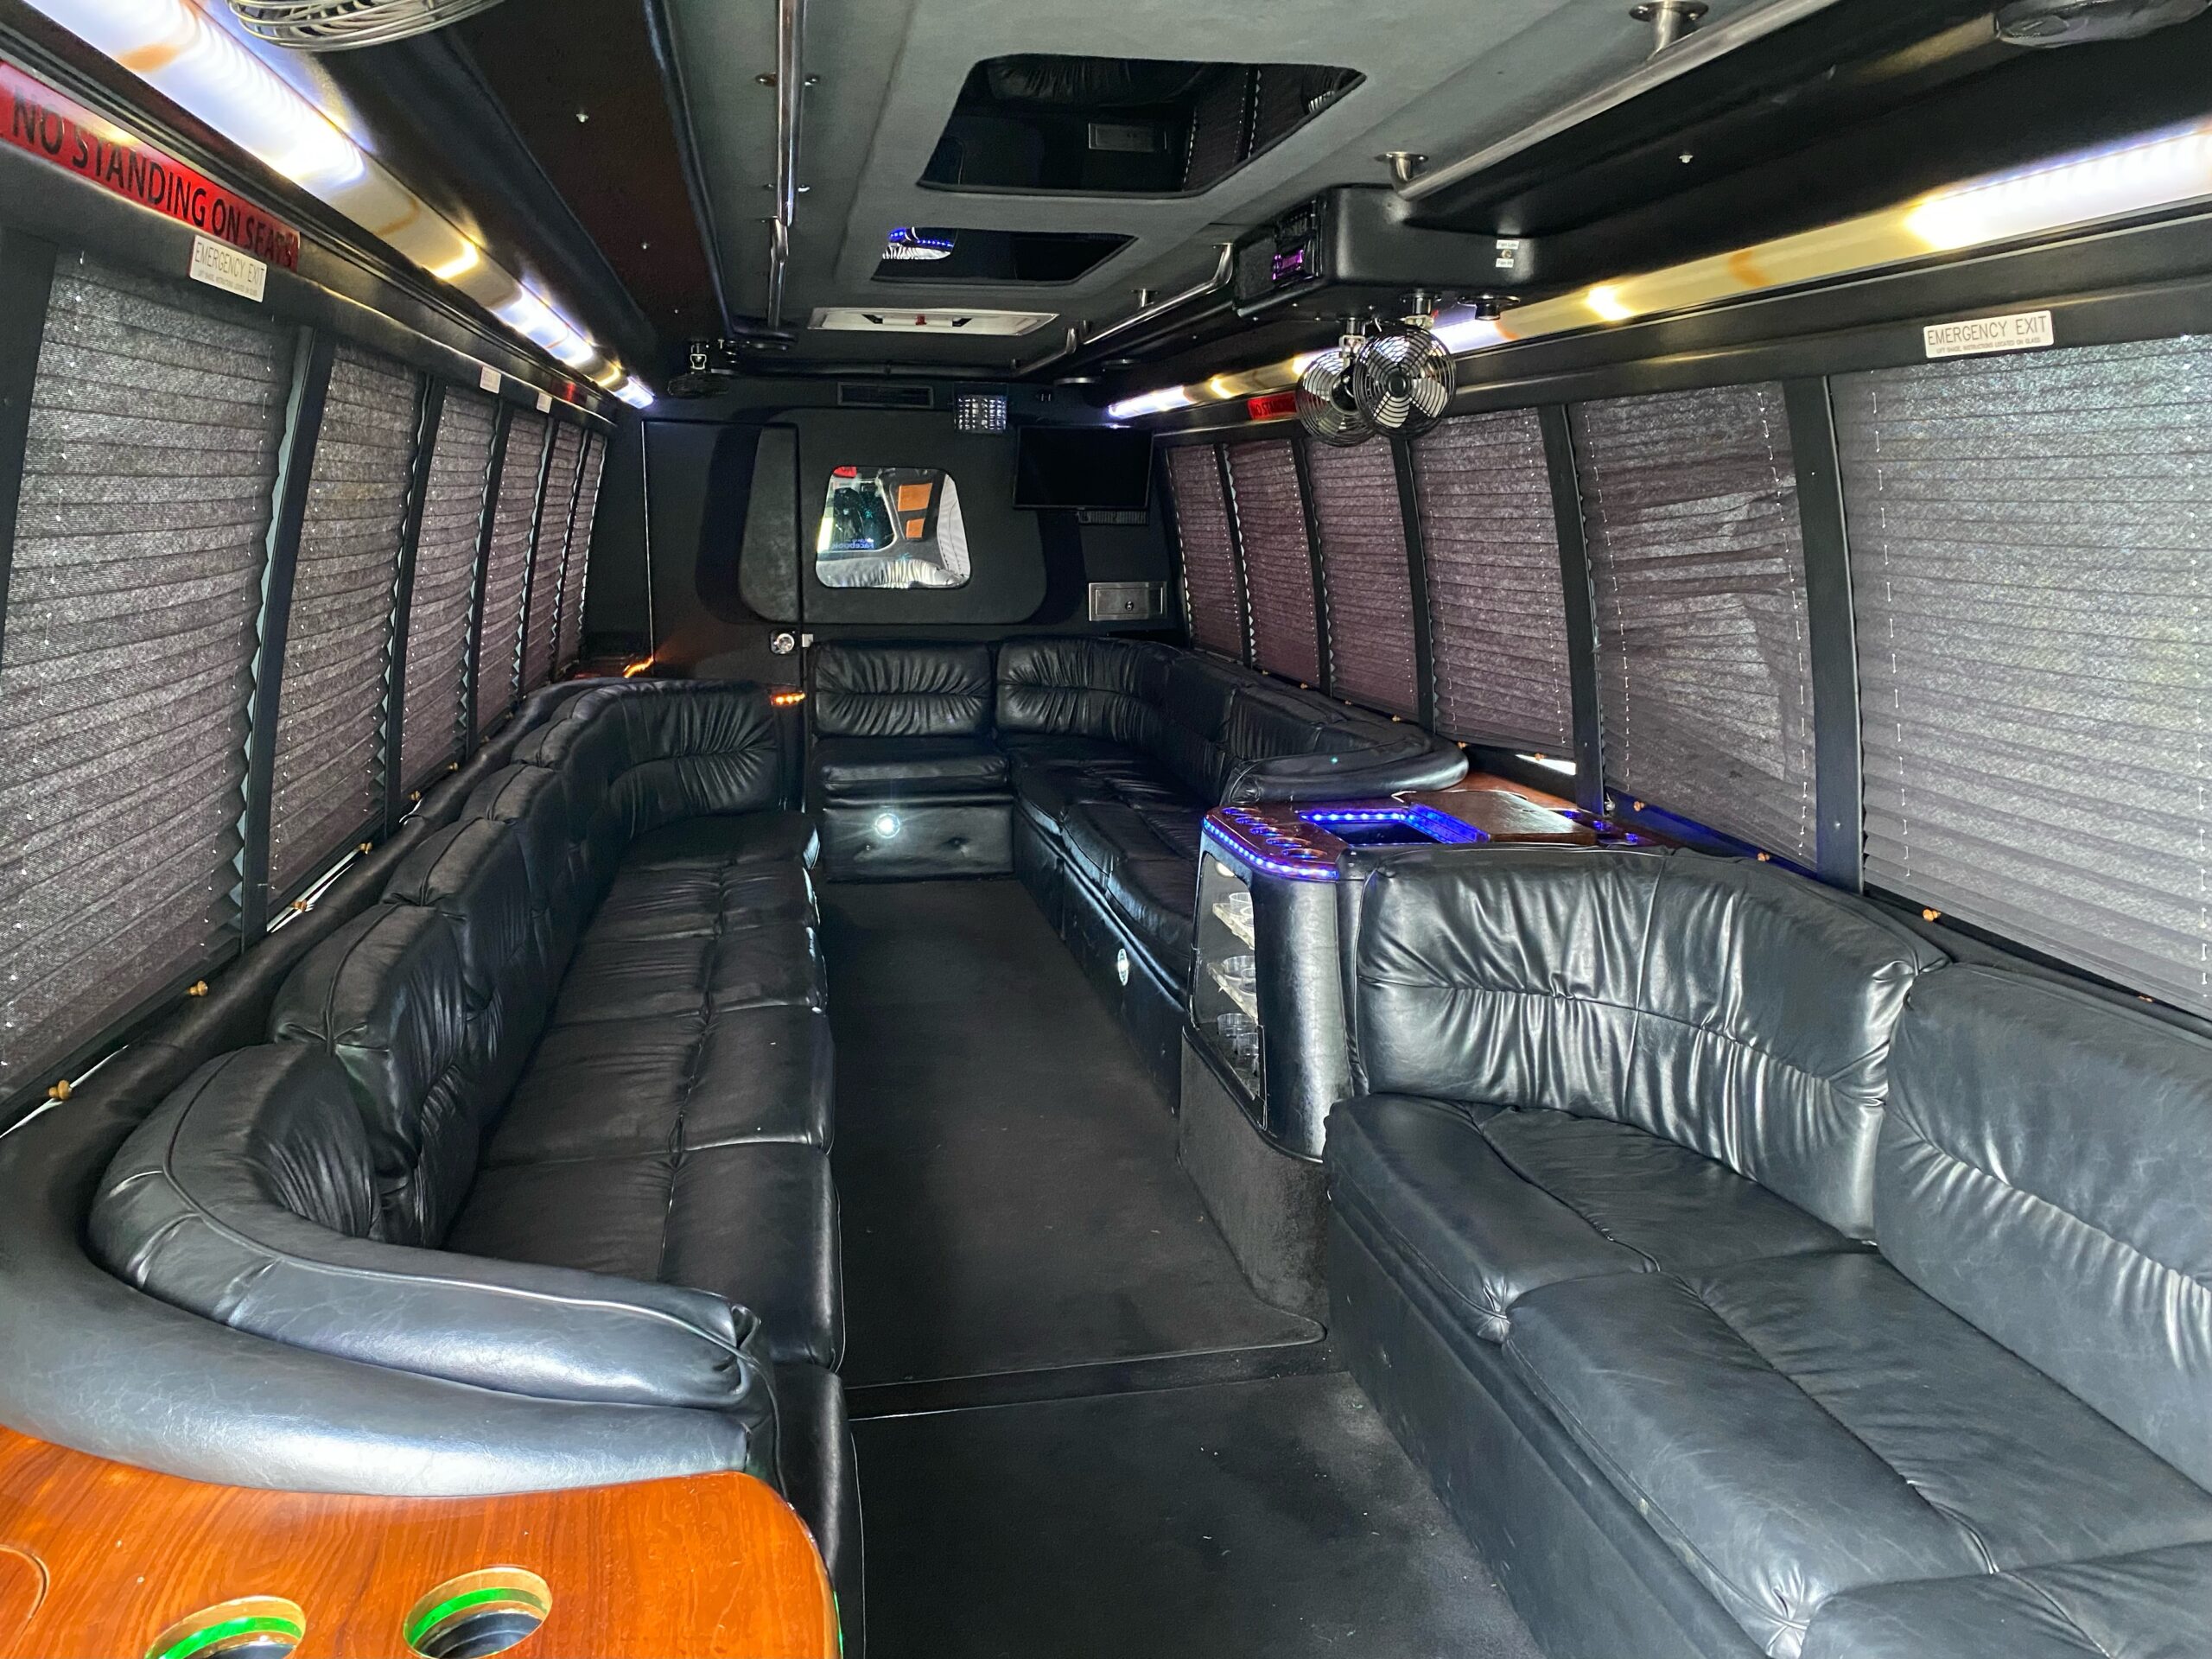 Party bus Mustang inside by st louis road pony<br />
